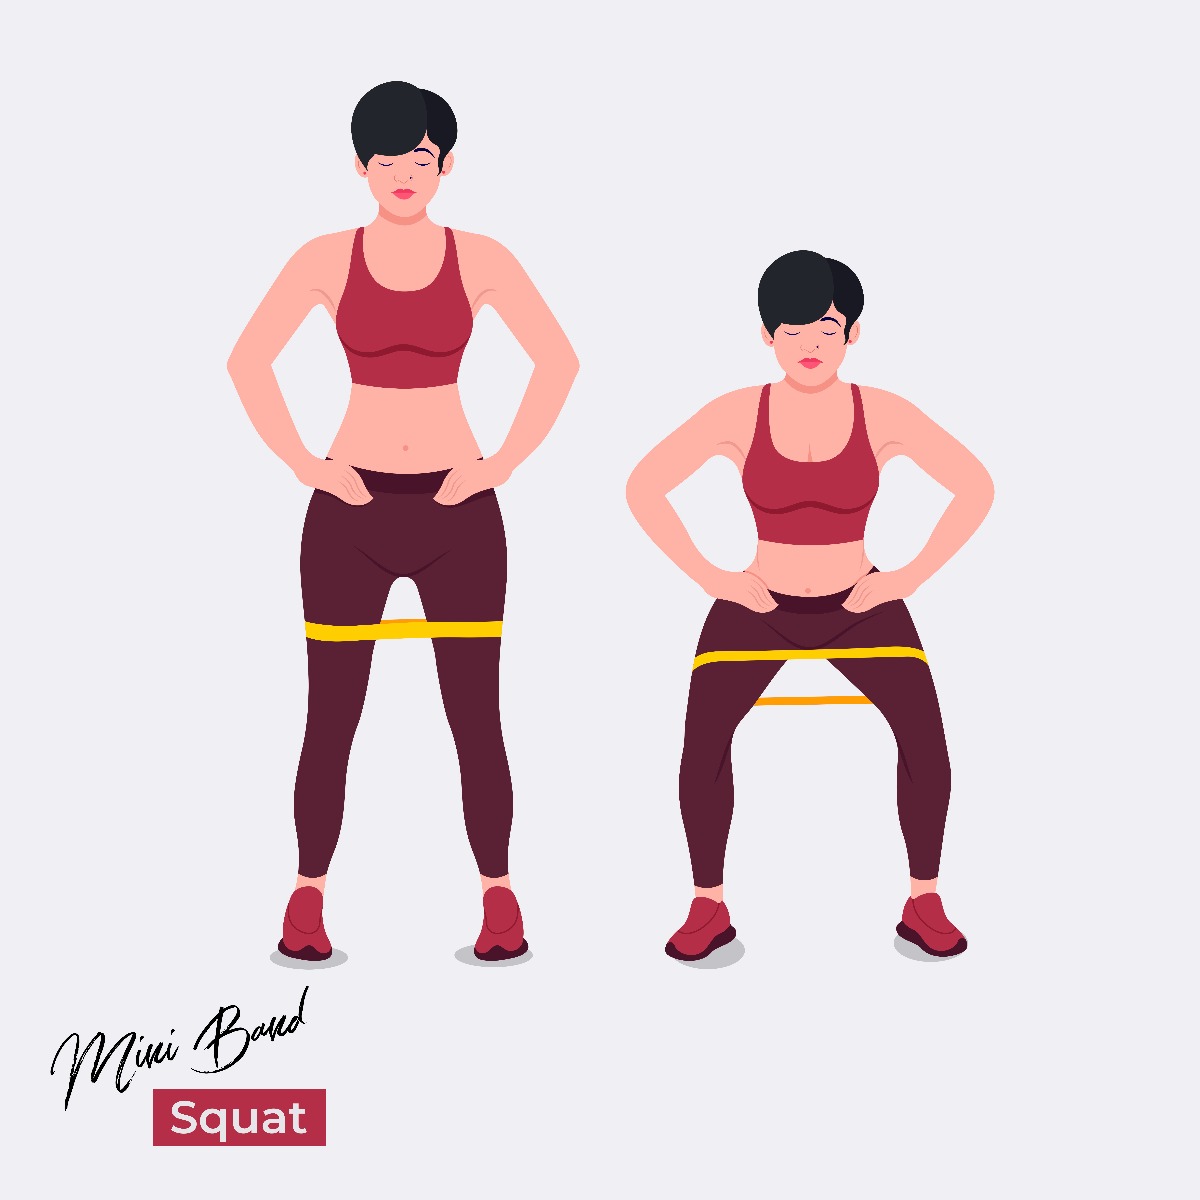 Illustration of a woman with a resistance band above her knees standing & lowering into a squat